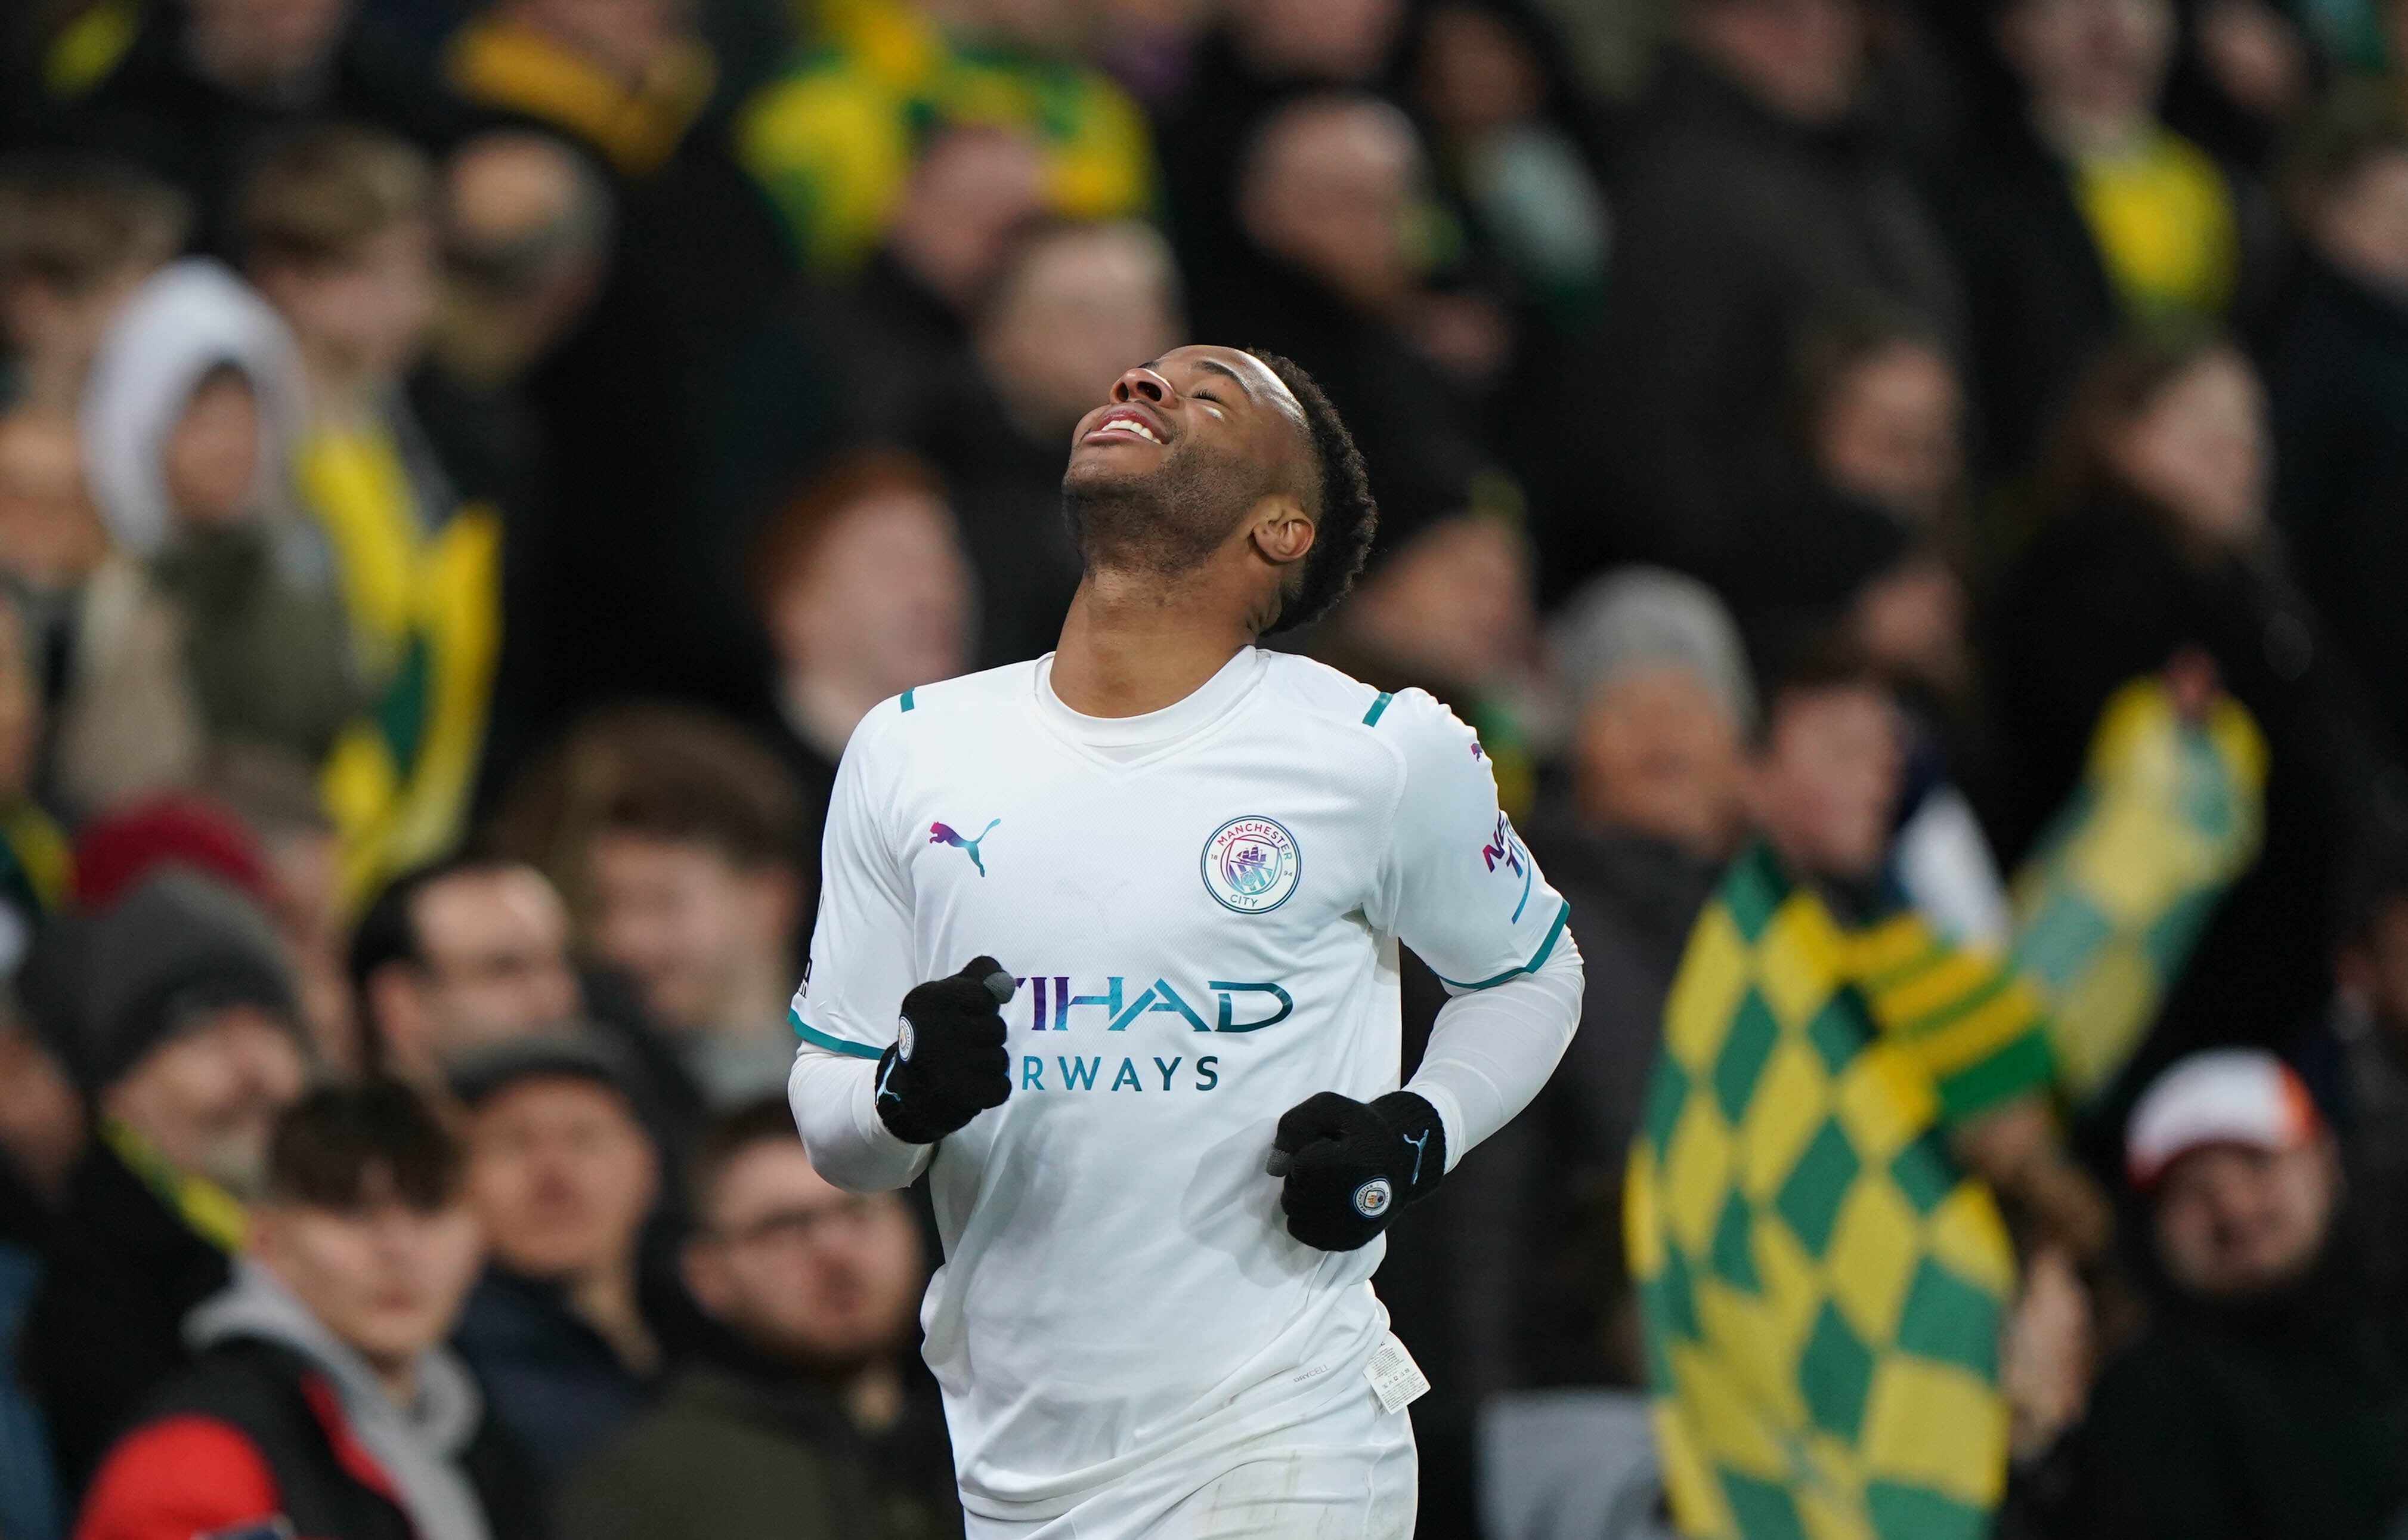 Raheem Sterling drew praise from Pep Guardiola after his hat-trick at Norwich